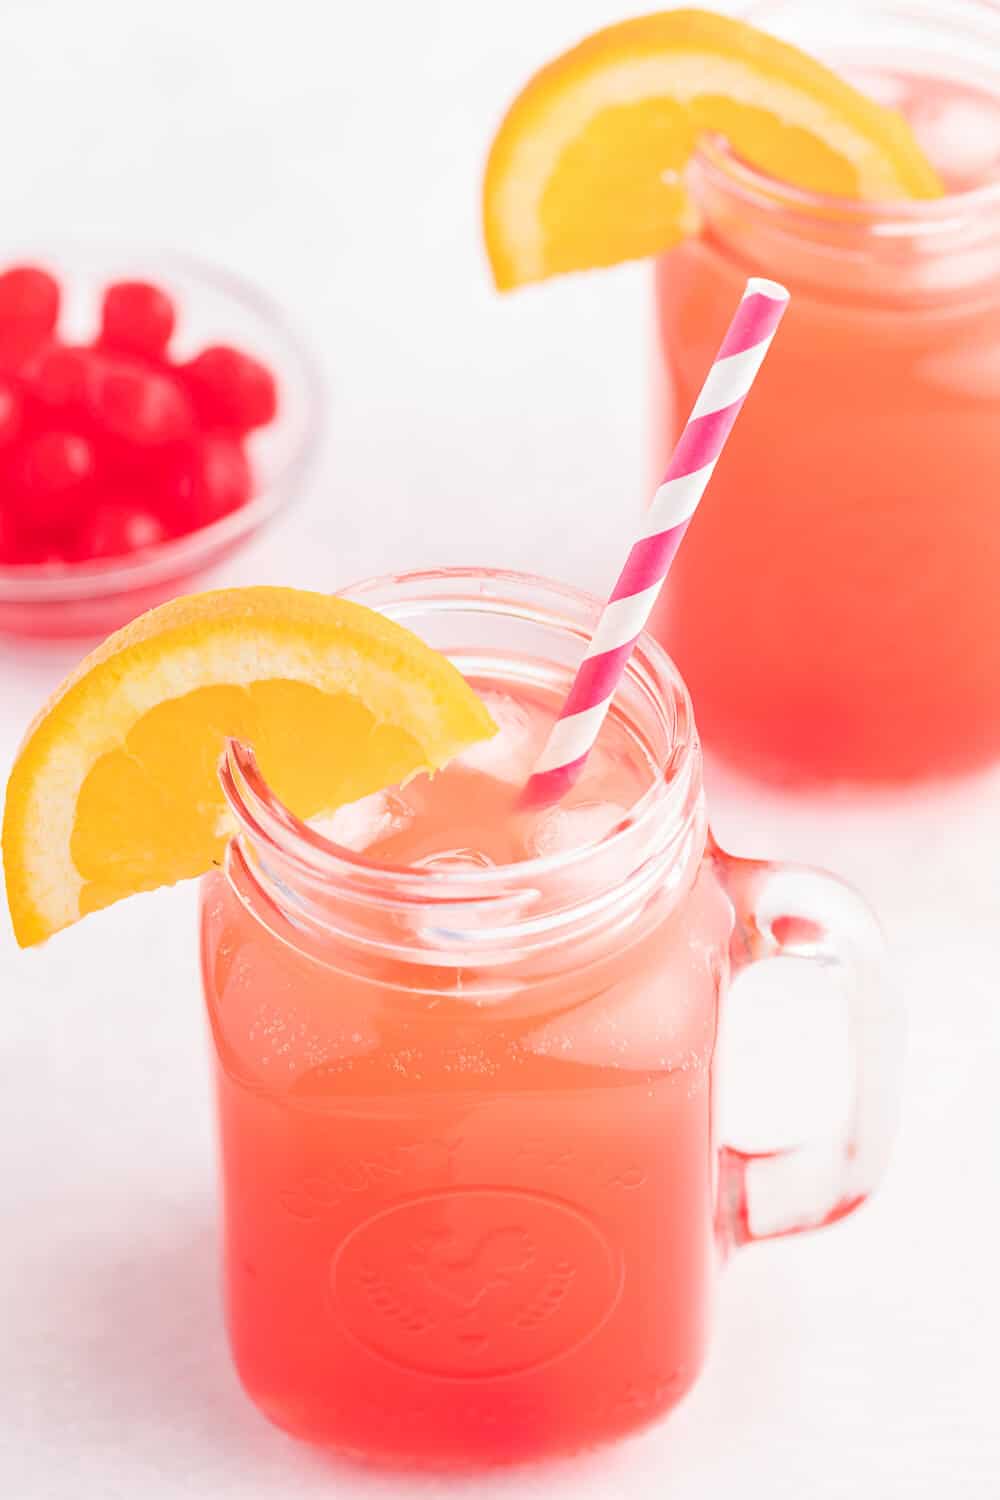 Shirley Temple - This classic mocktail beverage is sure to take you back to childhood. A perfect treat for kids and kids at heart, this sipper is full of fresh citrus juice, and is, of course, topped with a maraschino cherry!